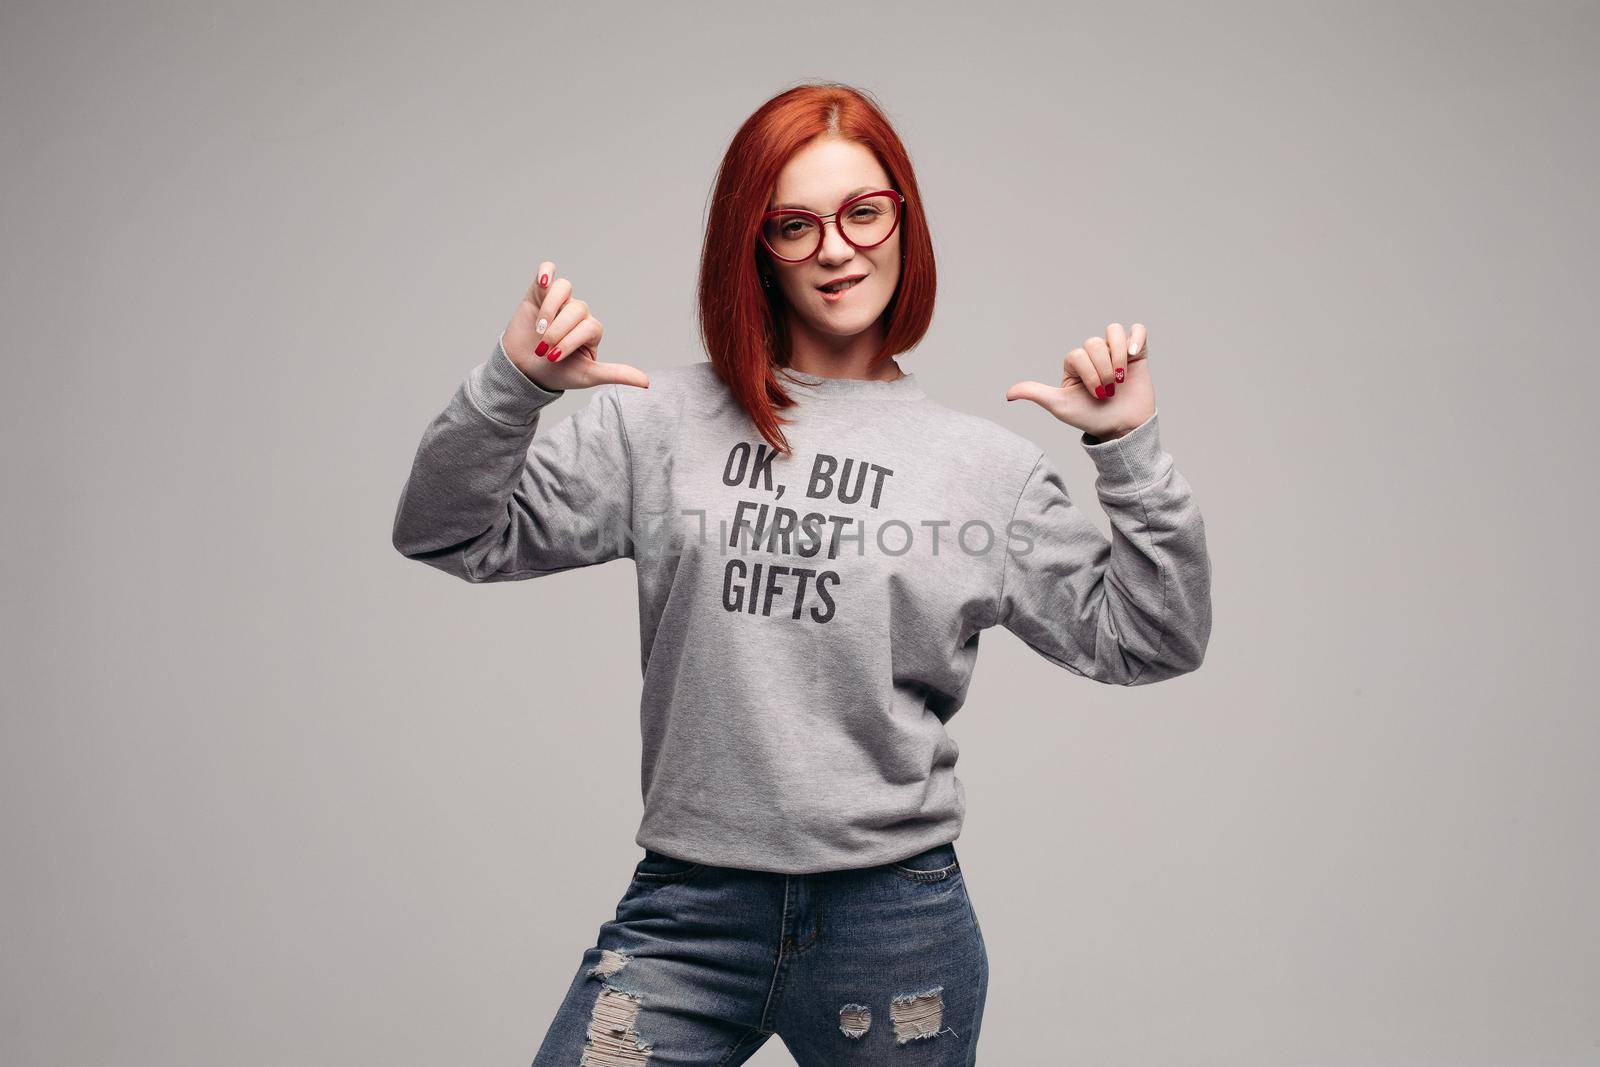 Red haired girl wearing gray sweatshirt showing her look, waiting for presents. by StudioLucky